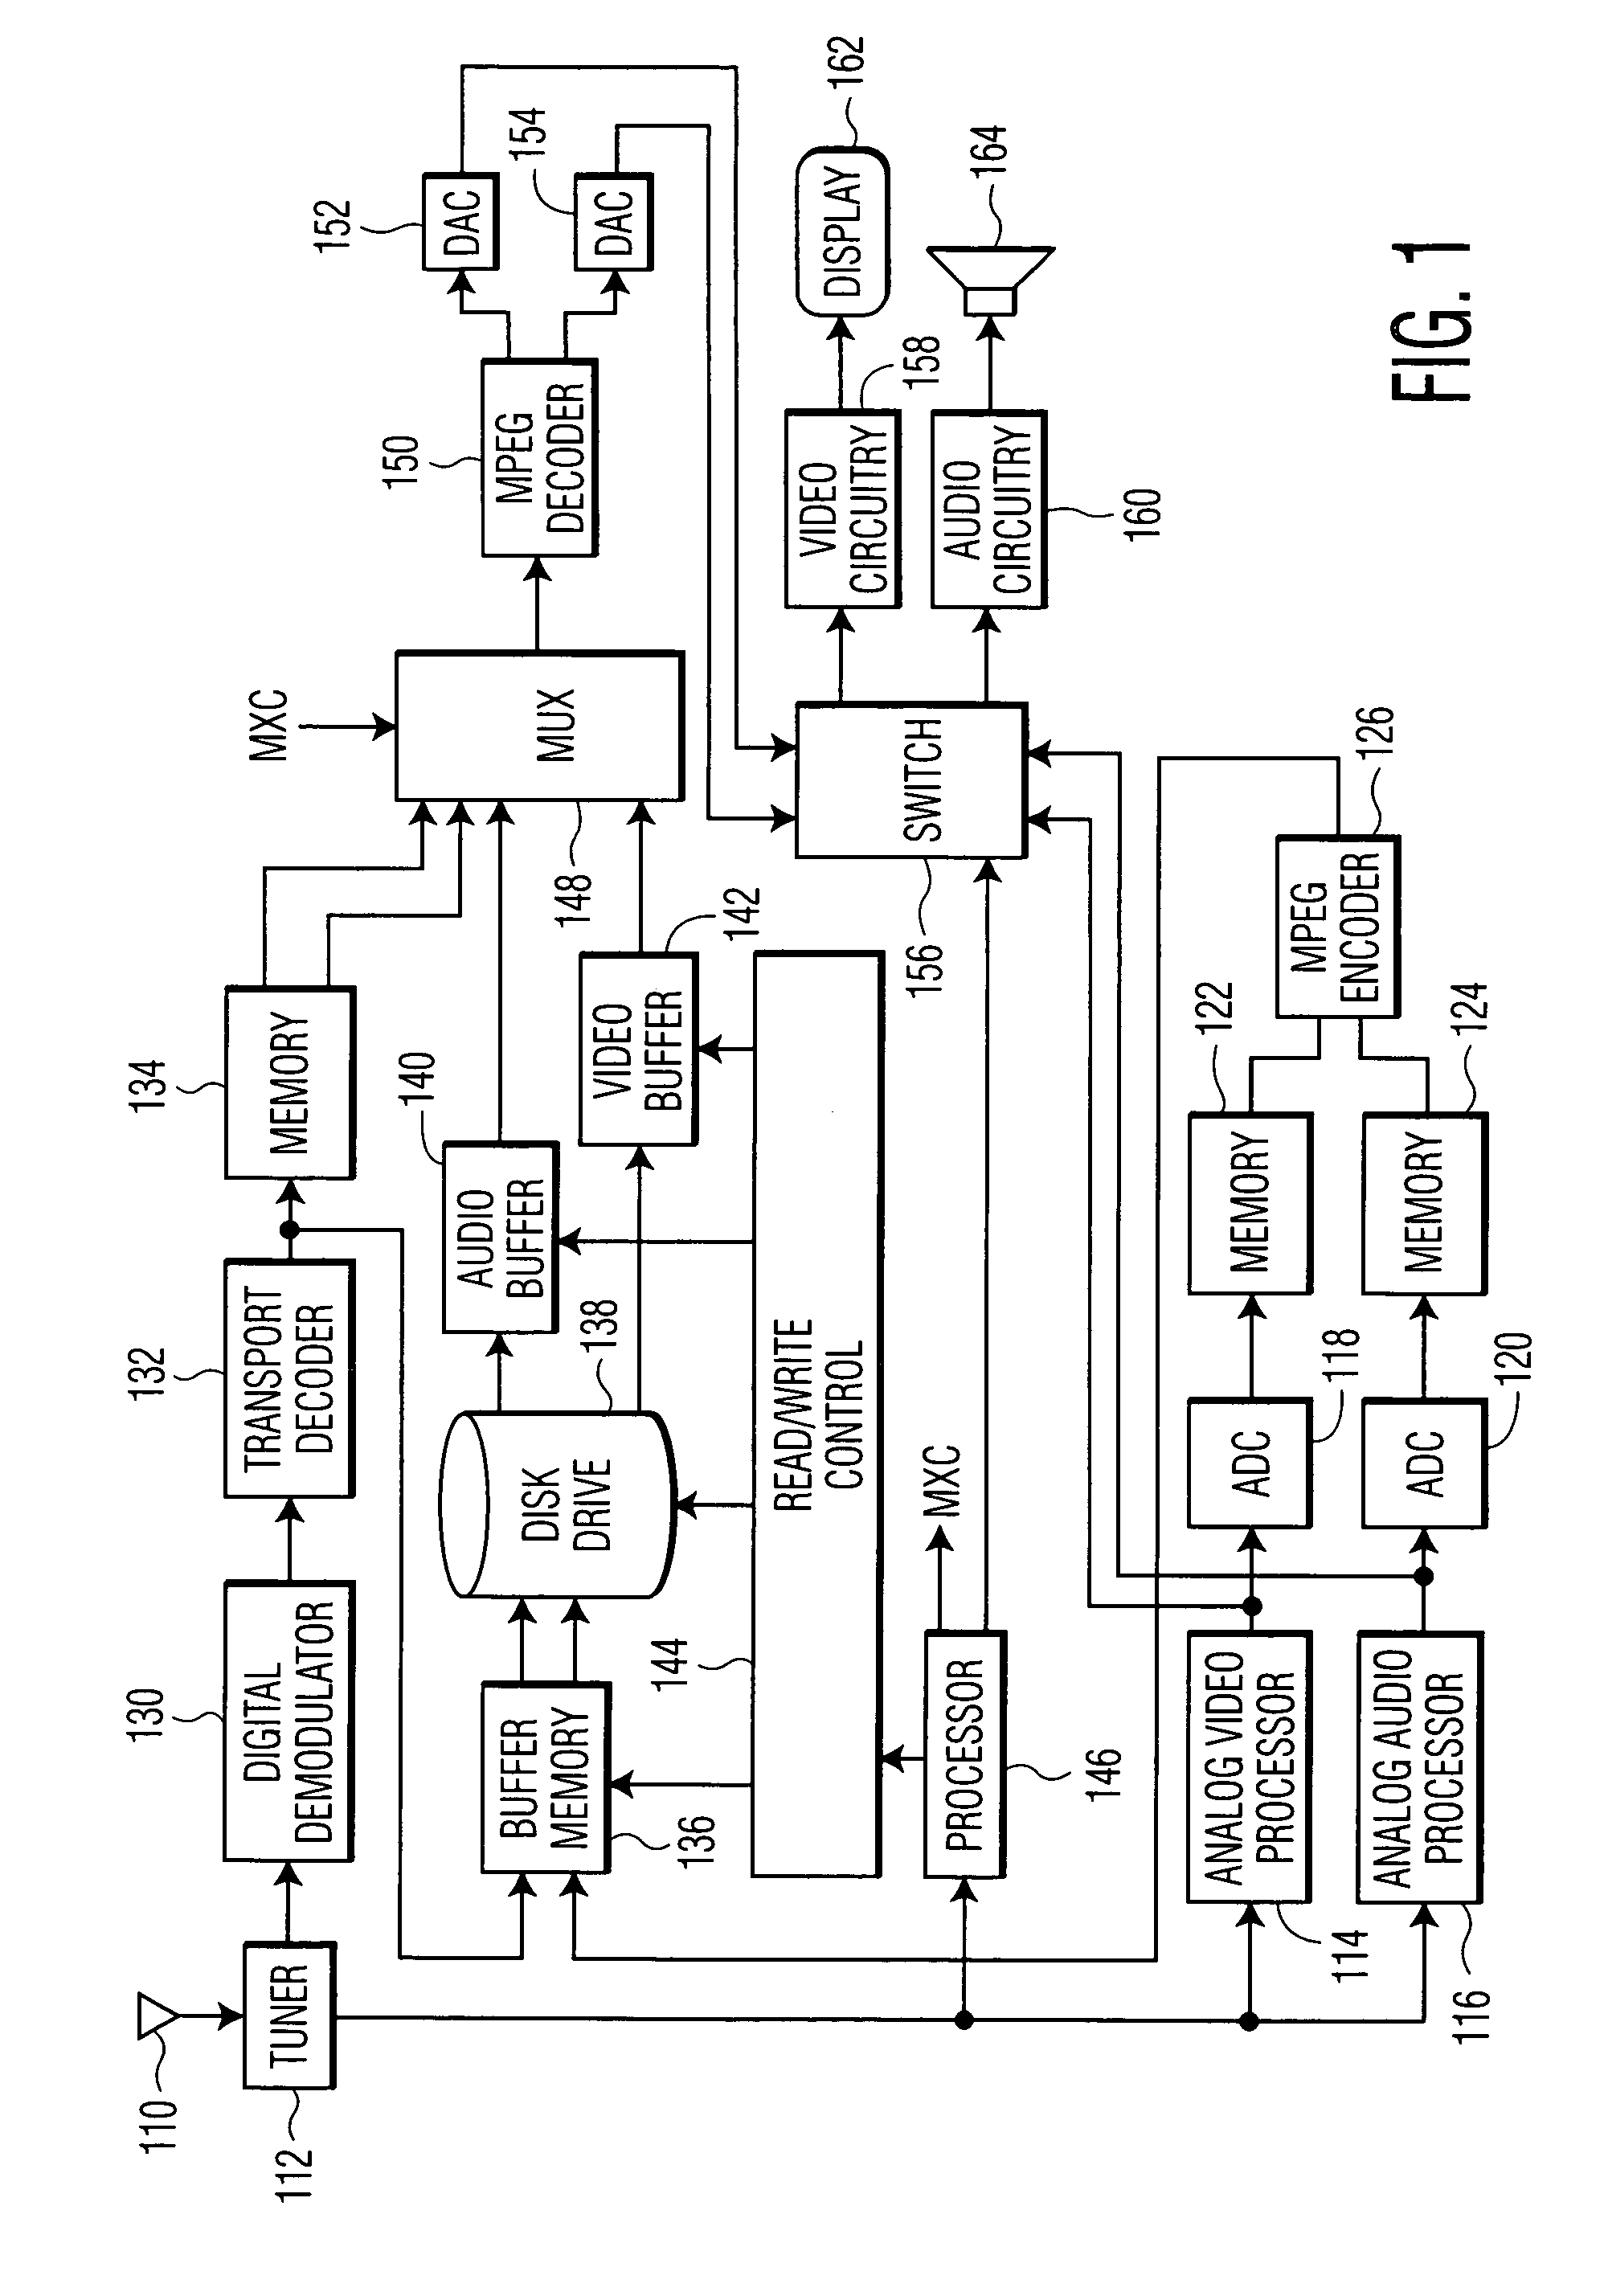 Method and apparatus for concealing disk soft errors in recorded digital television signals